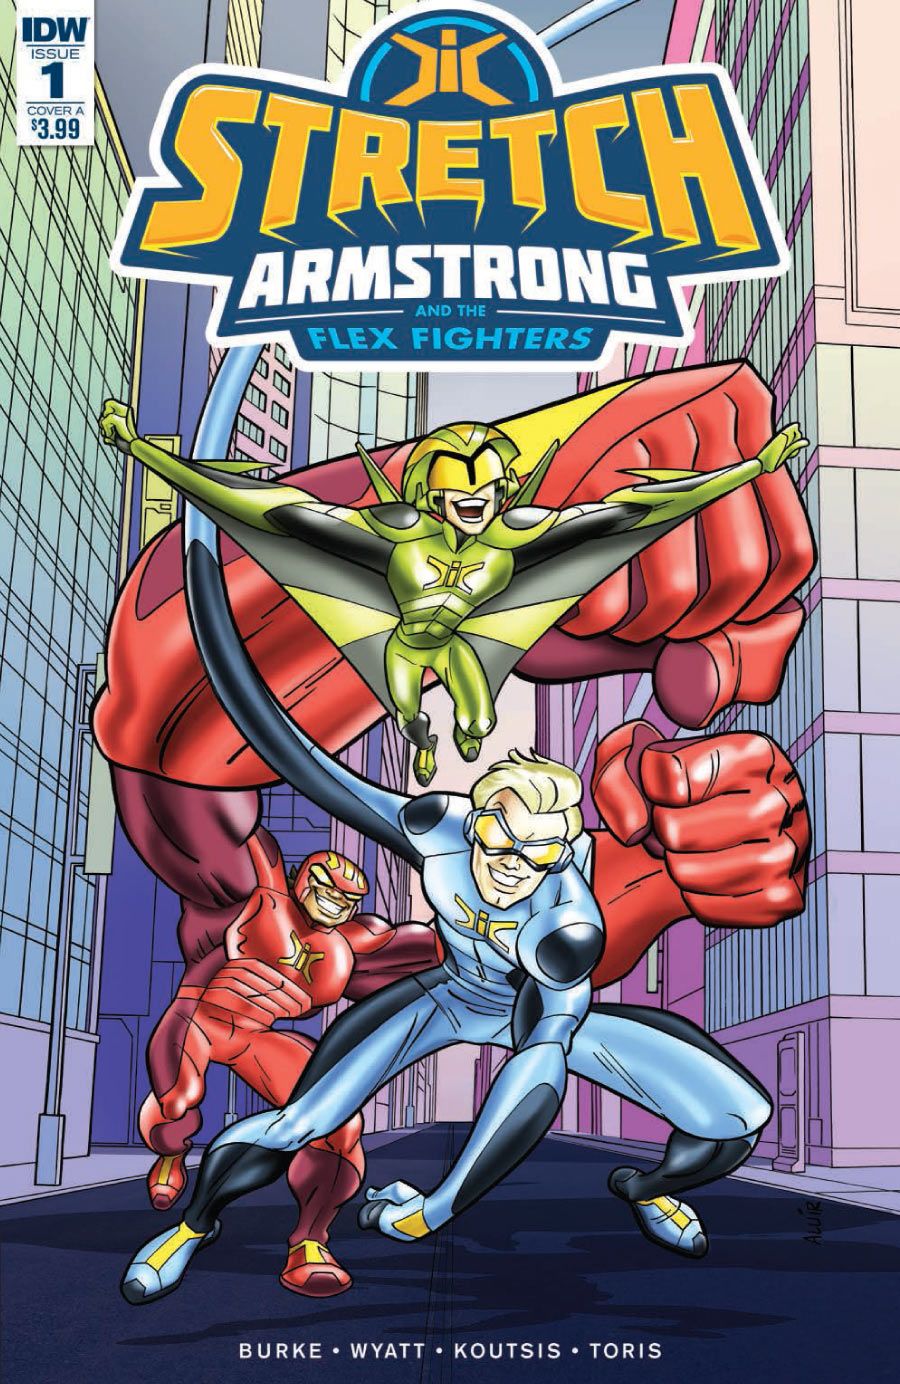 EXCLUSIVE: Stretch Armstrong and the Flex Fighters #1 by Kevin